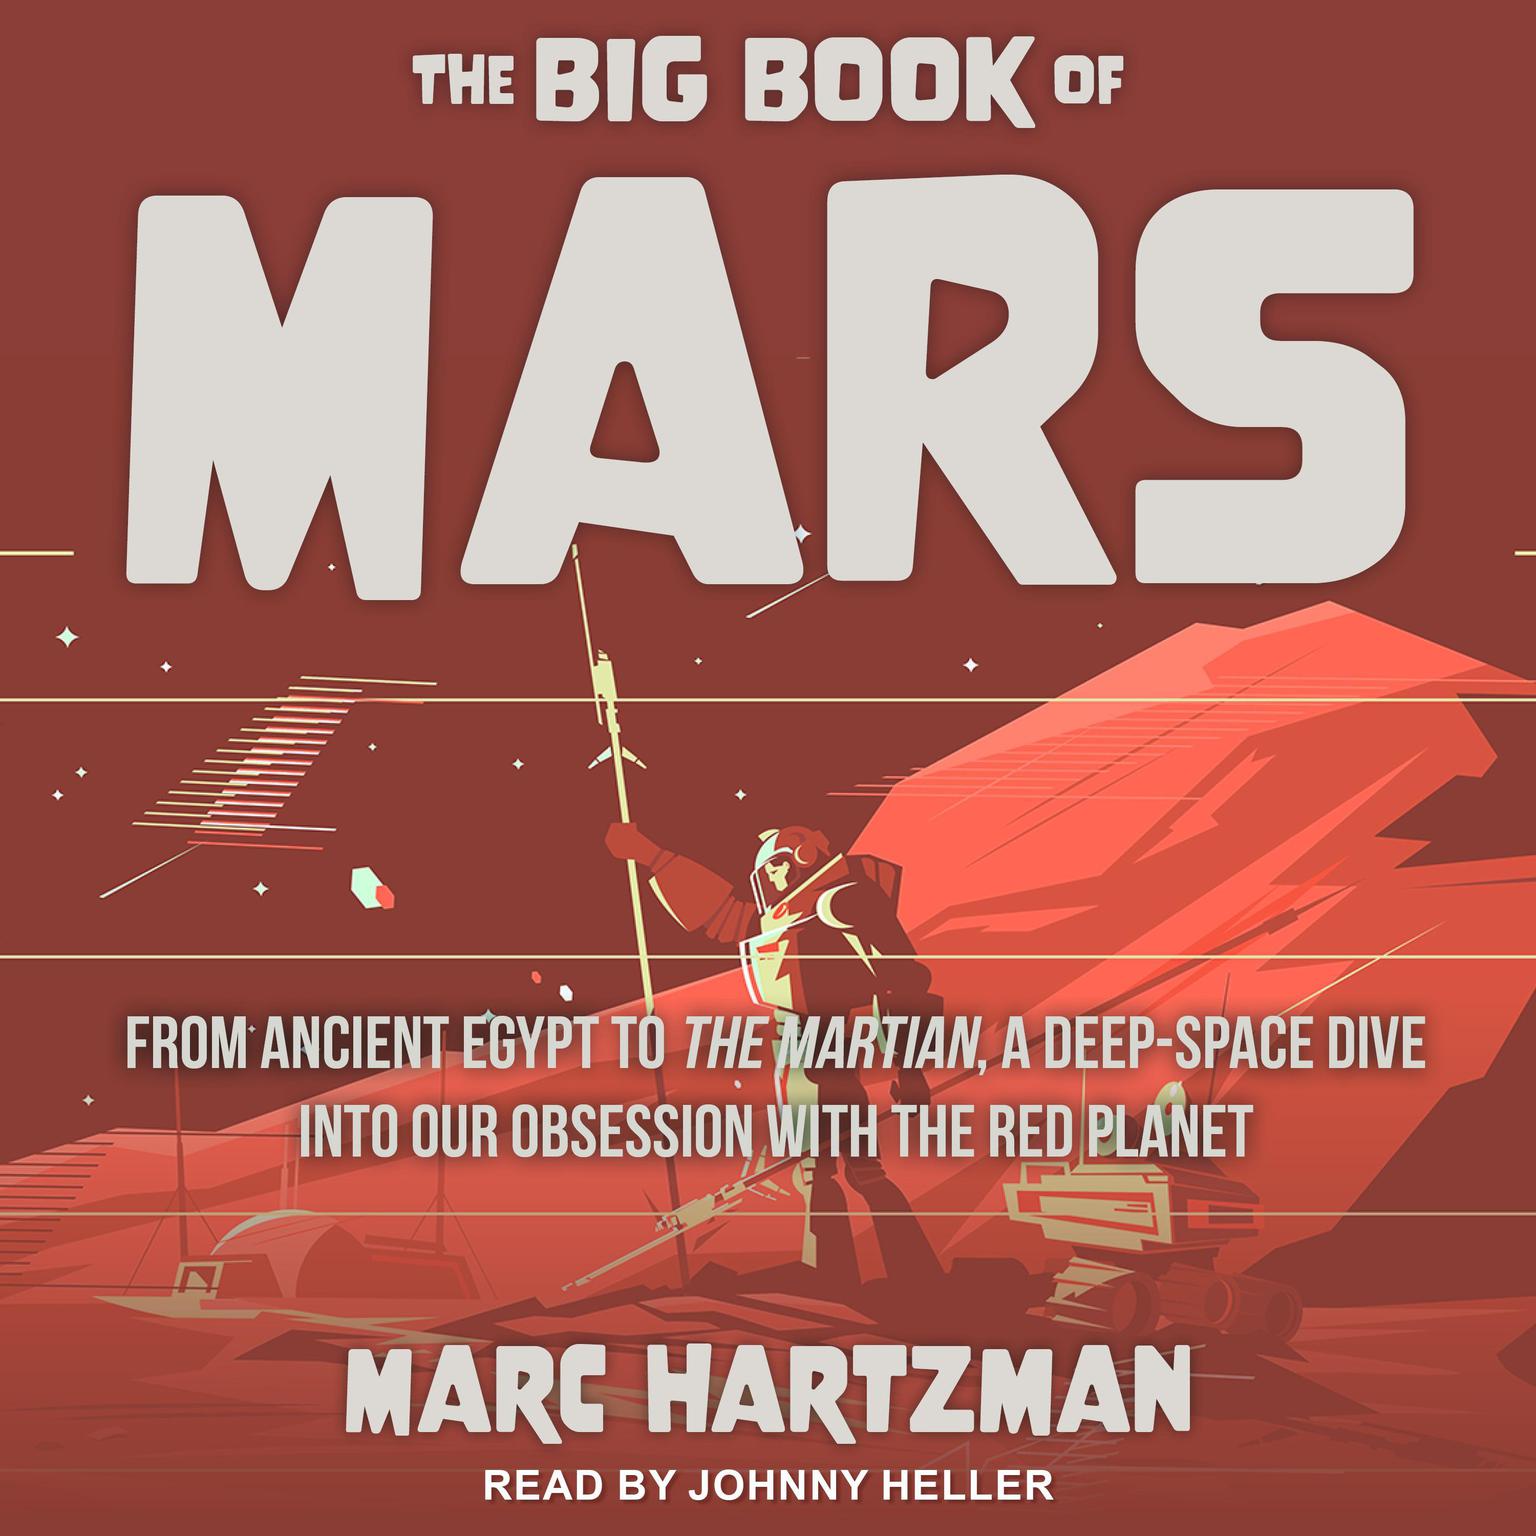 The Big Book of Mars: From Ancient Egypt to The Martian, A Deep-Space Dive into Our Obsession with the Red Planet Audiobook, by Marc Hartzman